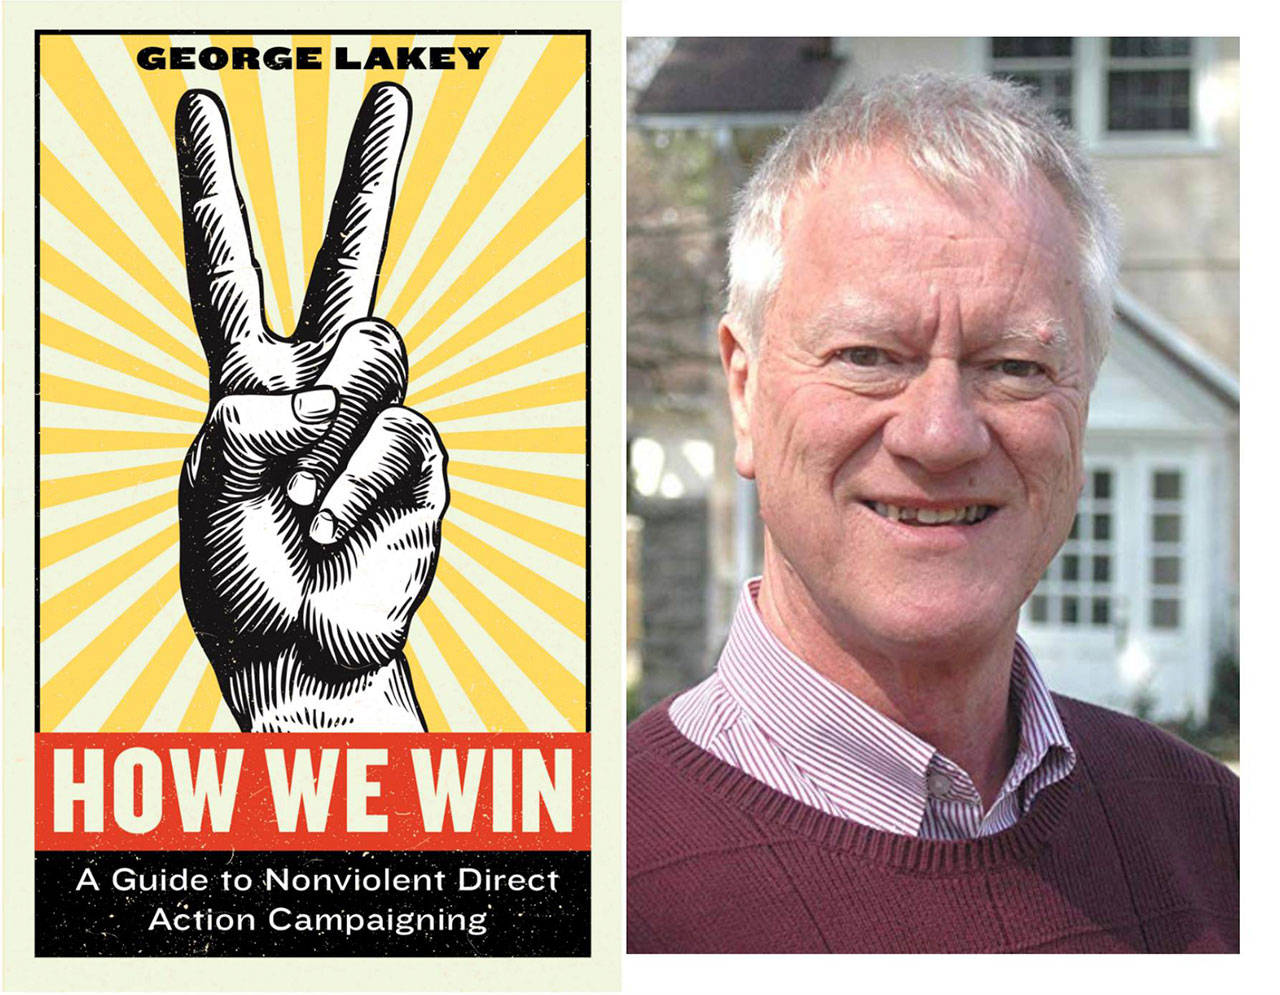 Images courtesy of Eagle Harbor Book Company | George Lakey will visit Eagle Harbor Book Company at 7 p.m. Thursday, Jan. 17 to discuss his new book “How We Win: A Guide to Nonviolent Direct Action Campaigns.”